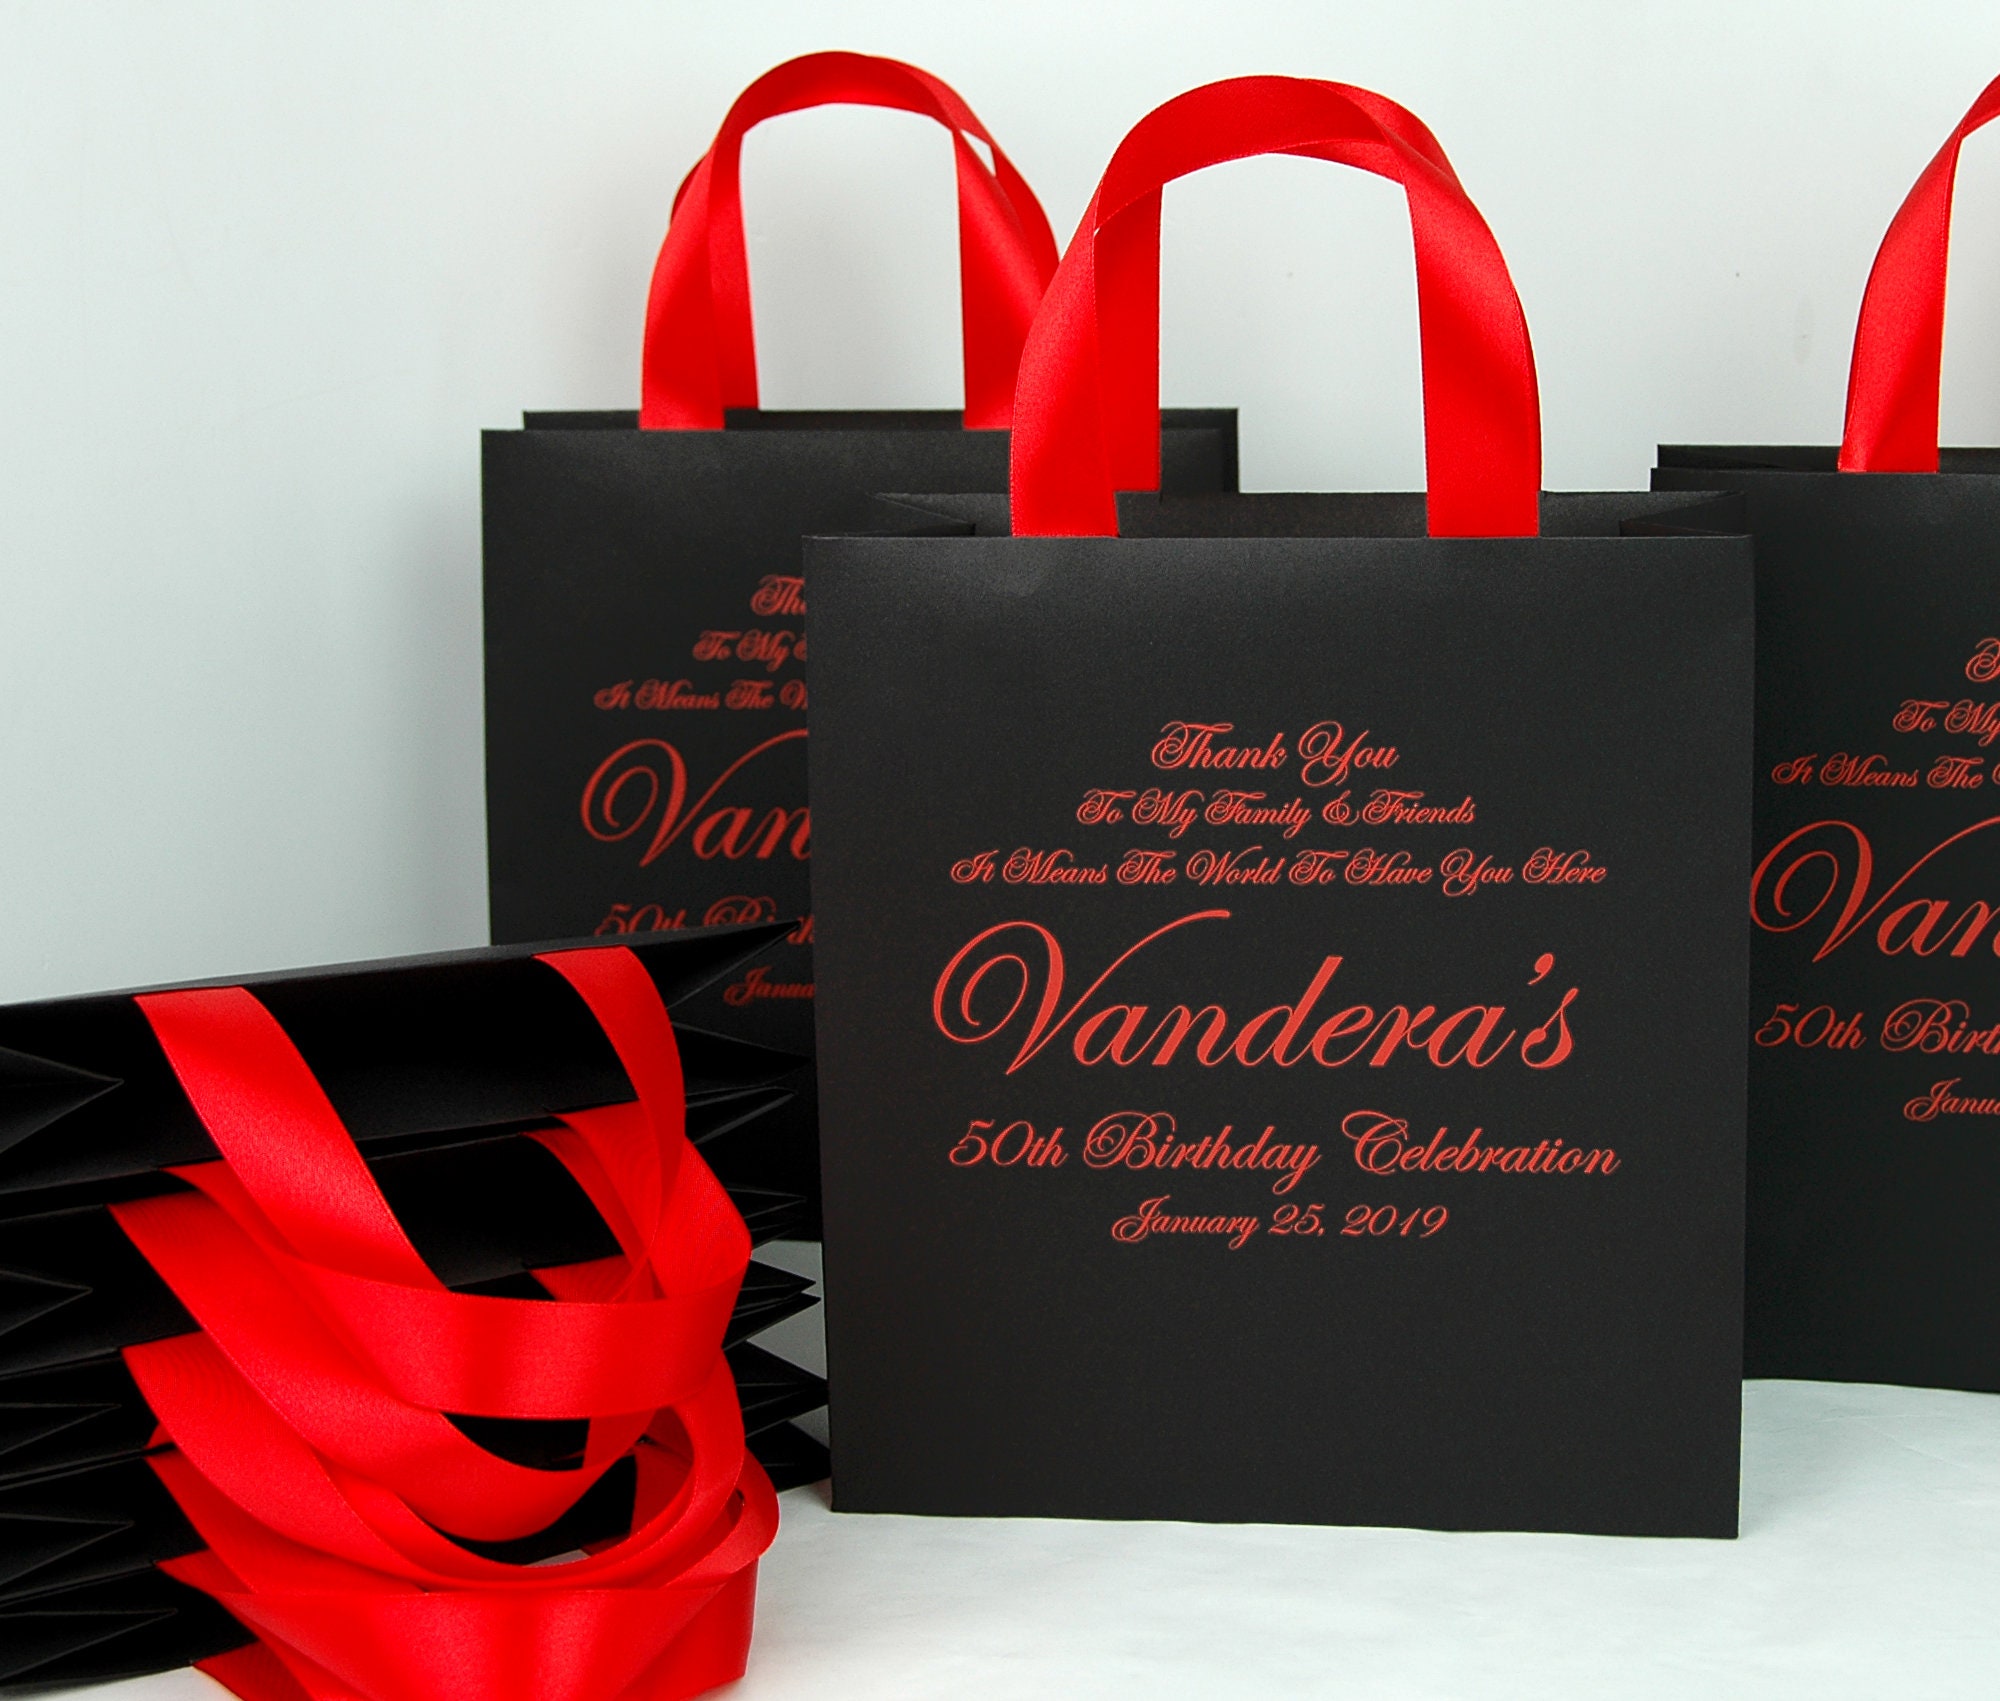 35 Black & Gold Birthday Party Gift Bags With Satin Ribbon Handles and  Custom Name Personalized Anniversary Party Gift and Favors for Guests 